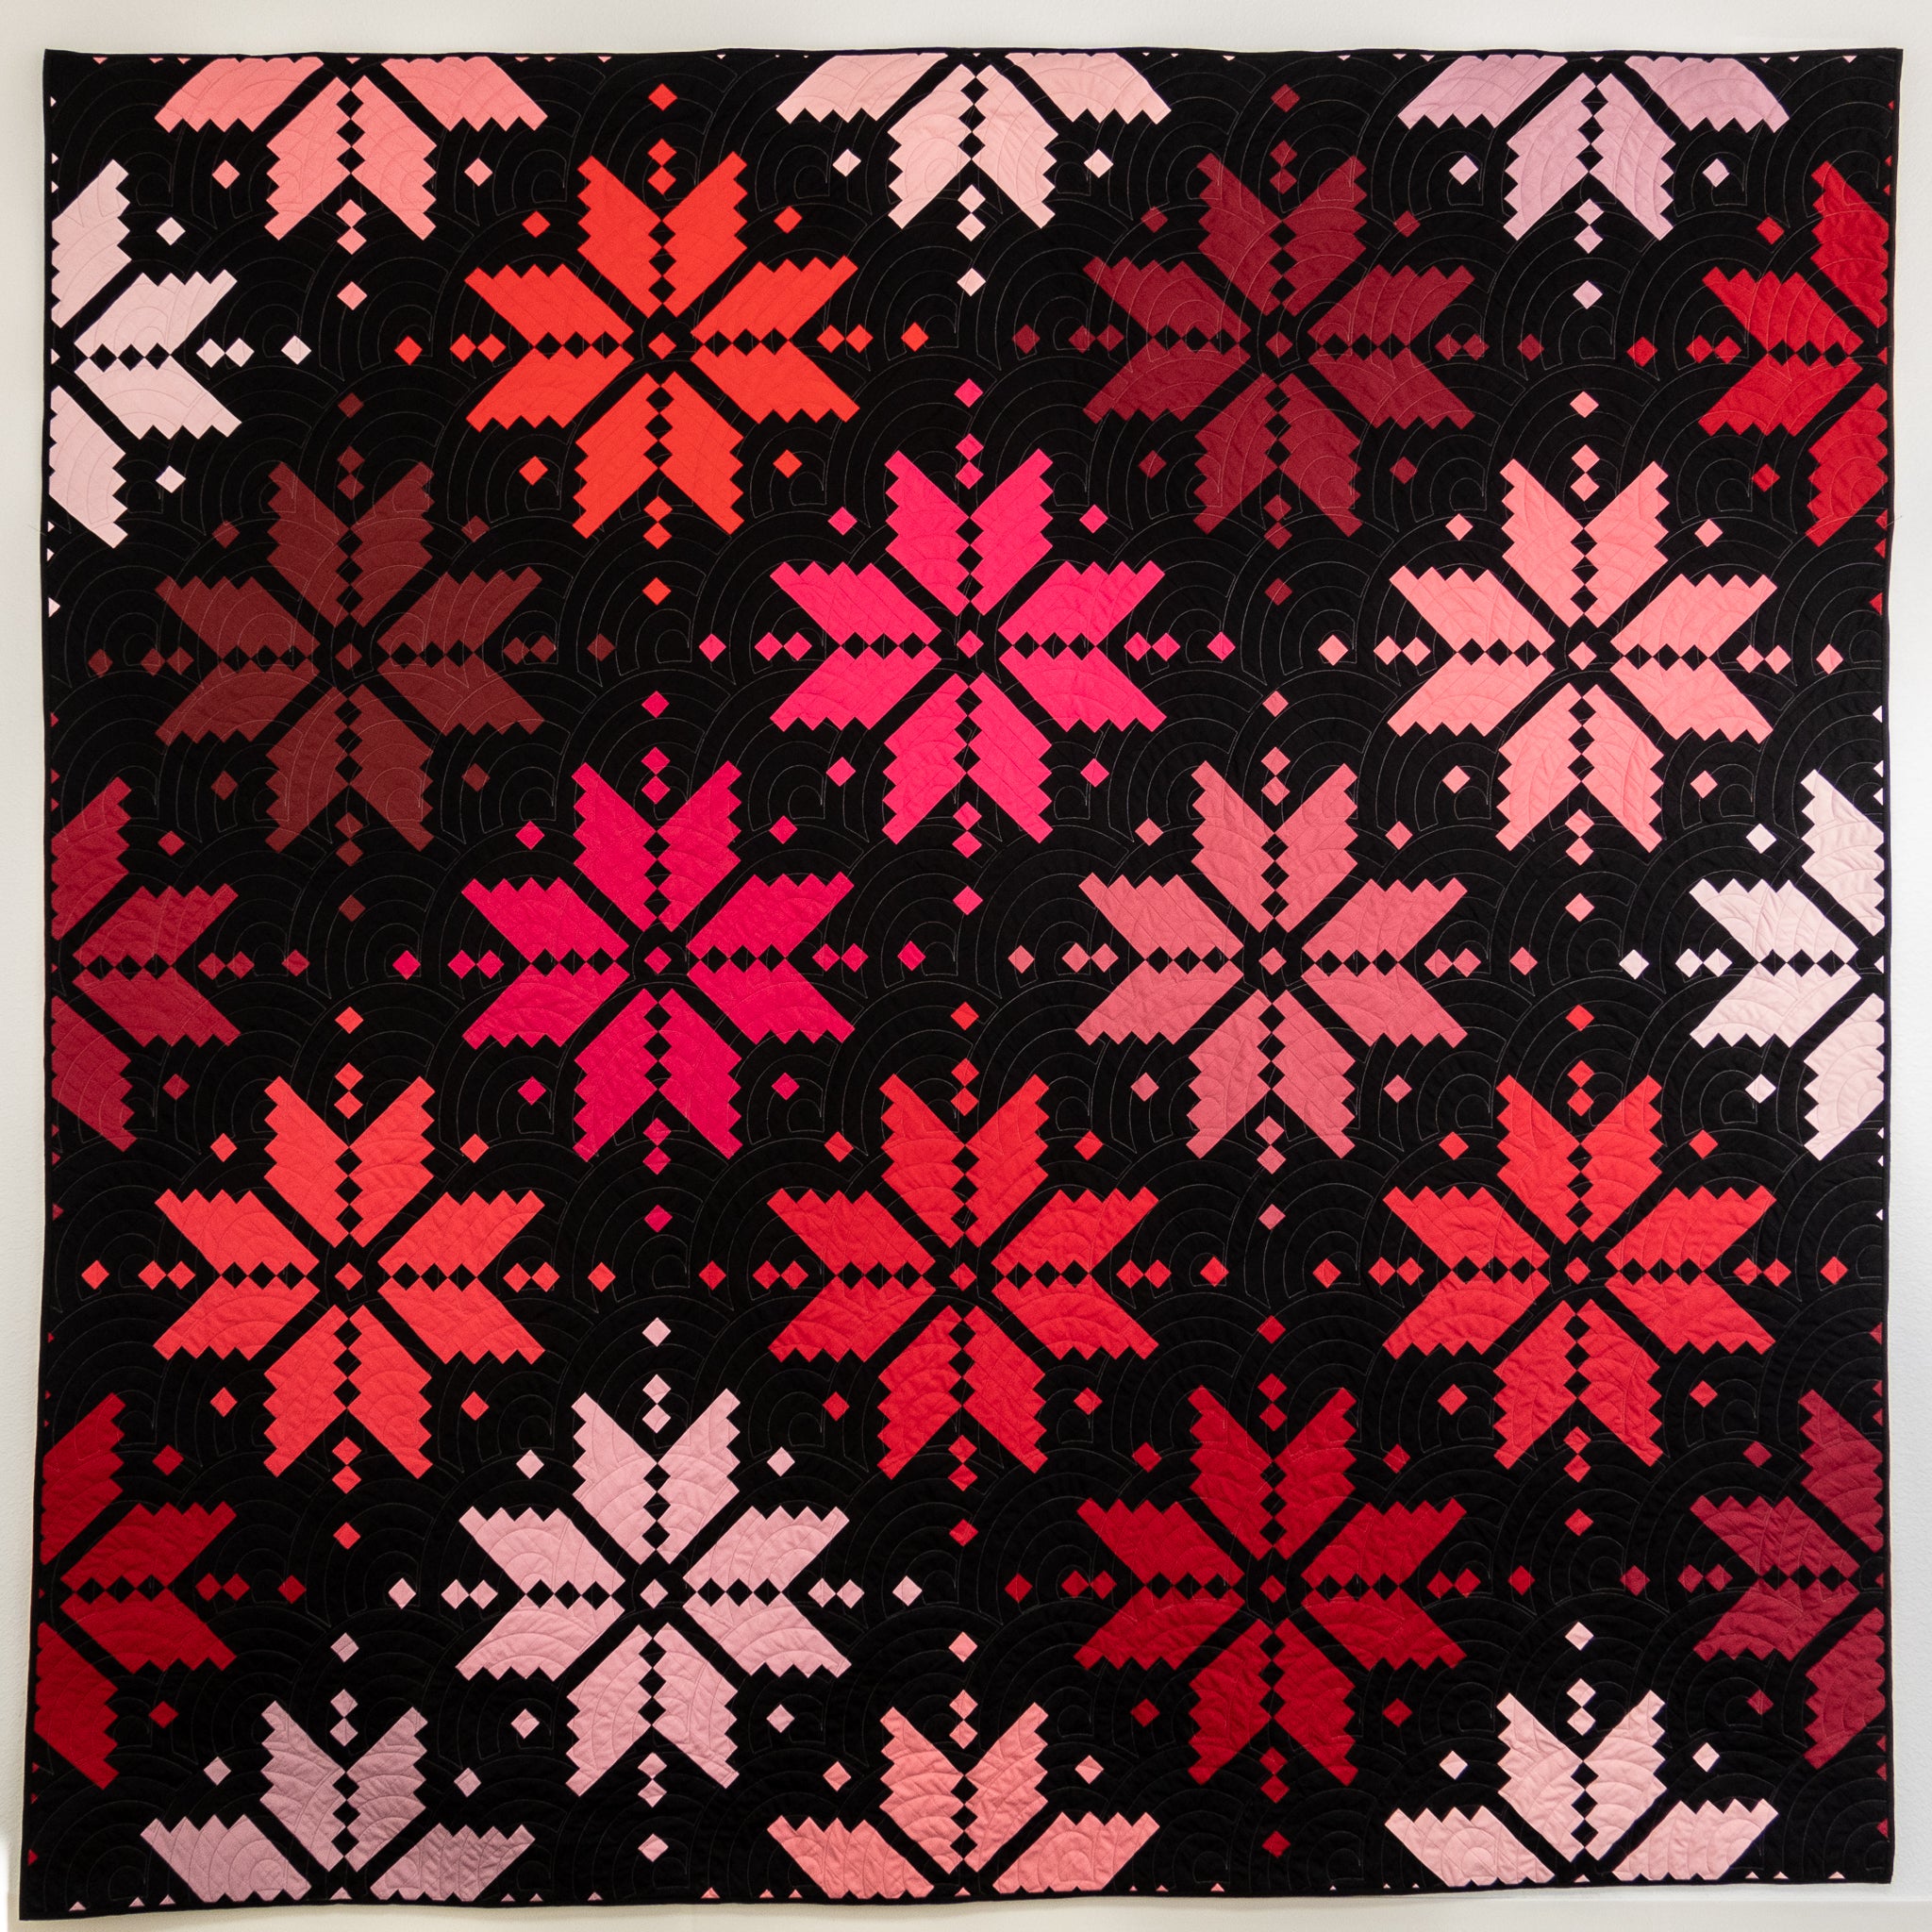 Knitted Star Quilt in red magenta - Sewfinity.com